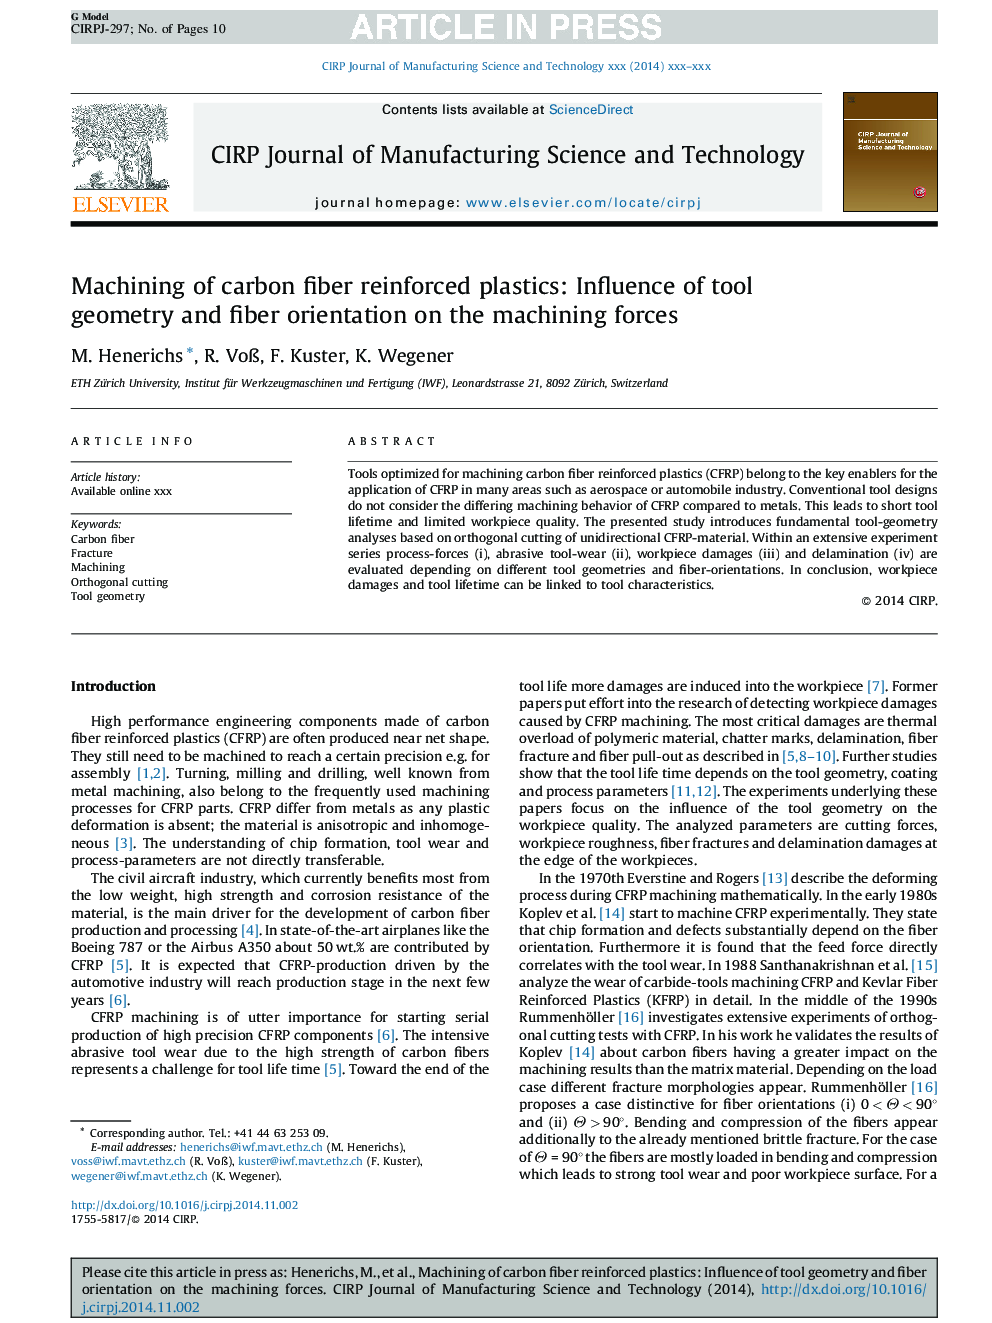 Machining of carbon fiber reinforced plastics: Influence of tool geometry and fiber orientation on the machining forces